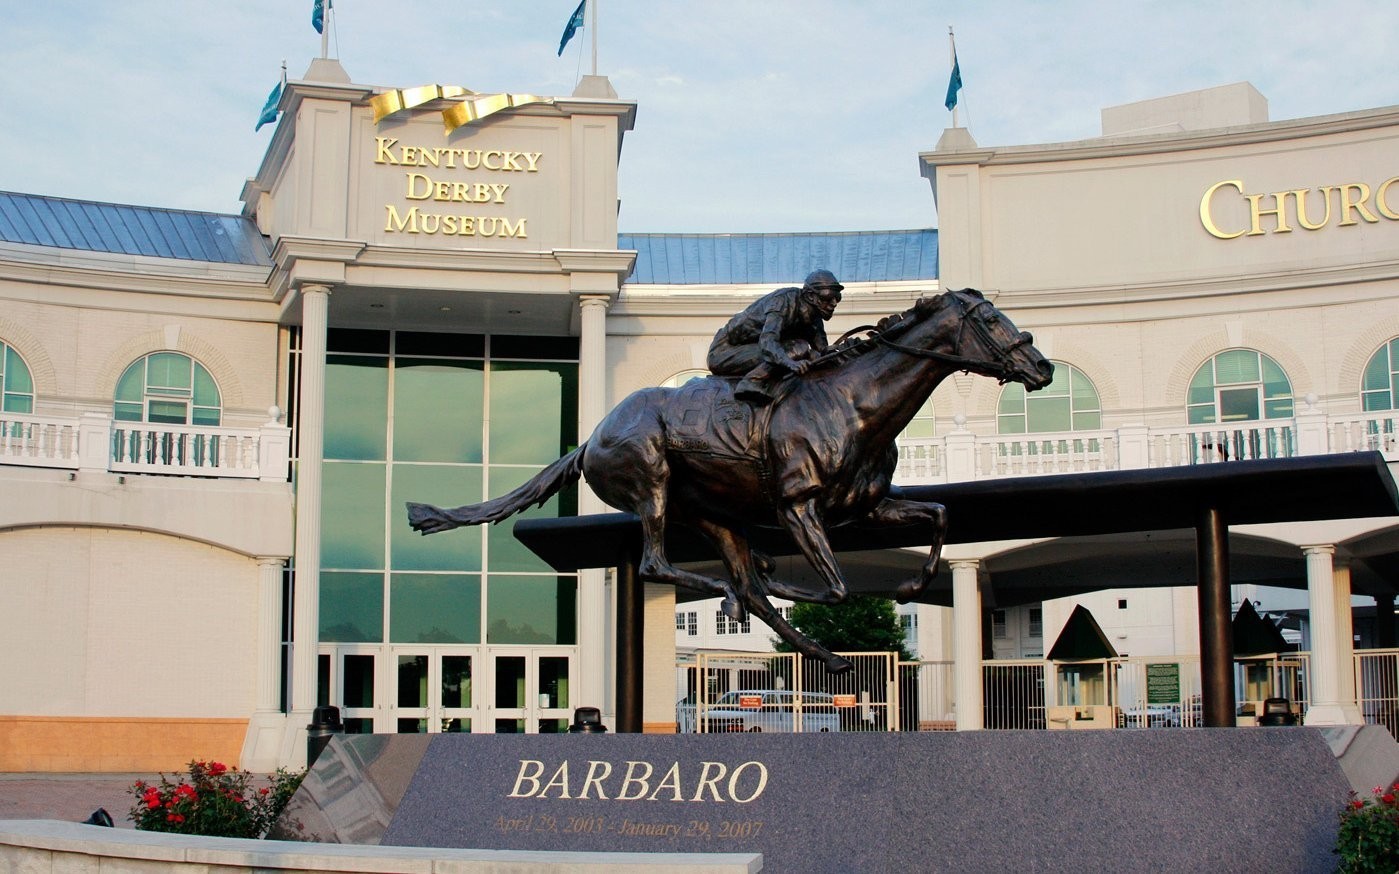 The Kentucky Derby Museum announces three new members to its Board of Directors